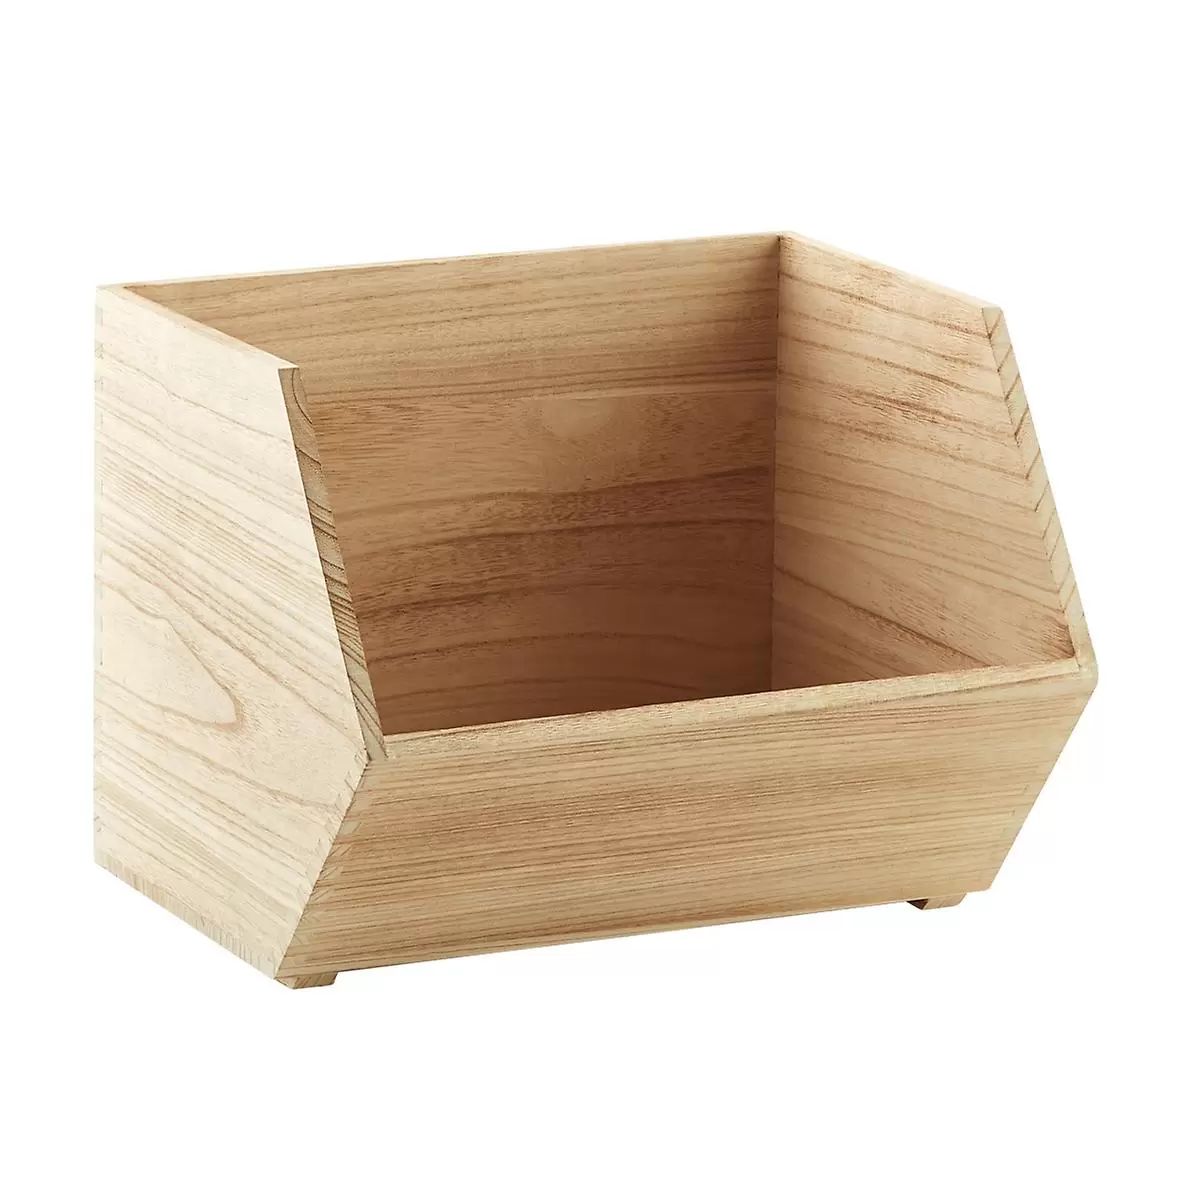 Large Wooden Stacking Bin | The Container Store